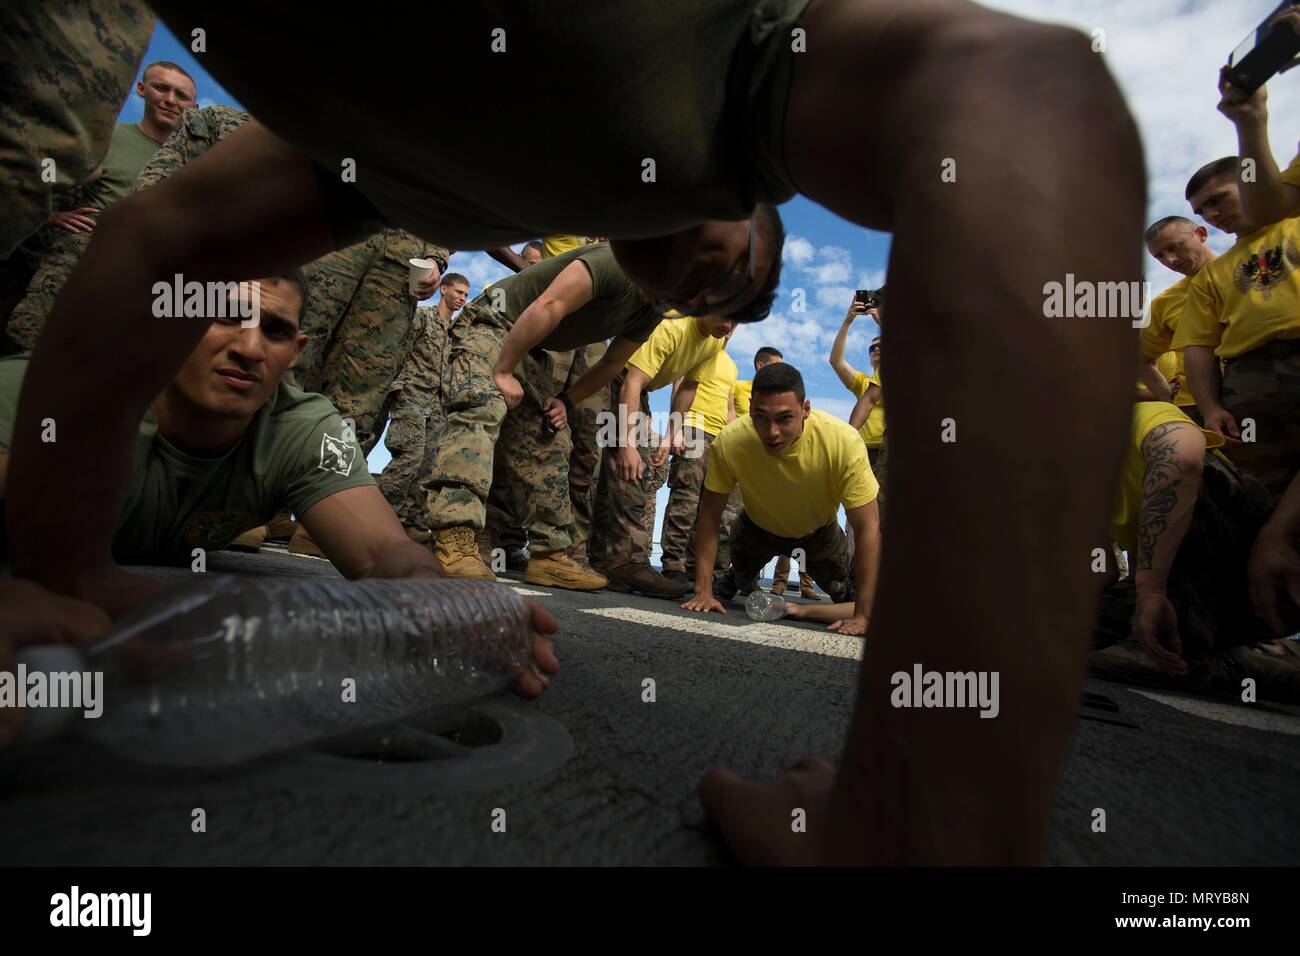 USNS SACAGAWEA— Lance Cpl. Juan Bustos competes in a pushup contest against French soldiers in celebration of Bastille Day July 14 aboard the USNS SACAGAWEA. Bastille Day is recognized as the day the French gained their independence from King Louis XVI by liberating prisoners from the Bastille Prison in 1789 and are now celebrating their 228th year as a free nation. Bustos is a combat photographer with III Marine Expeditionary Force, currently deployed to Koa Moana 17. (U.S. Marine Corps Photo by Sgt. Douglas D. Simons) Stock Photo